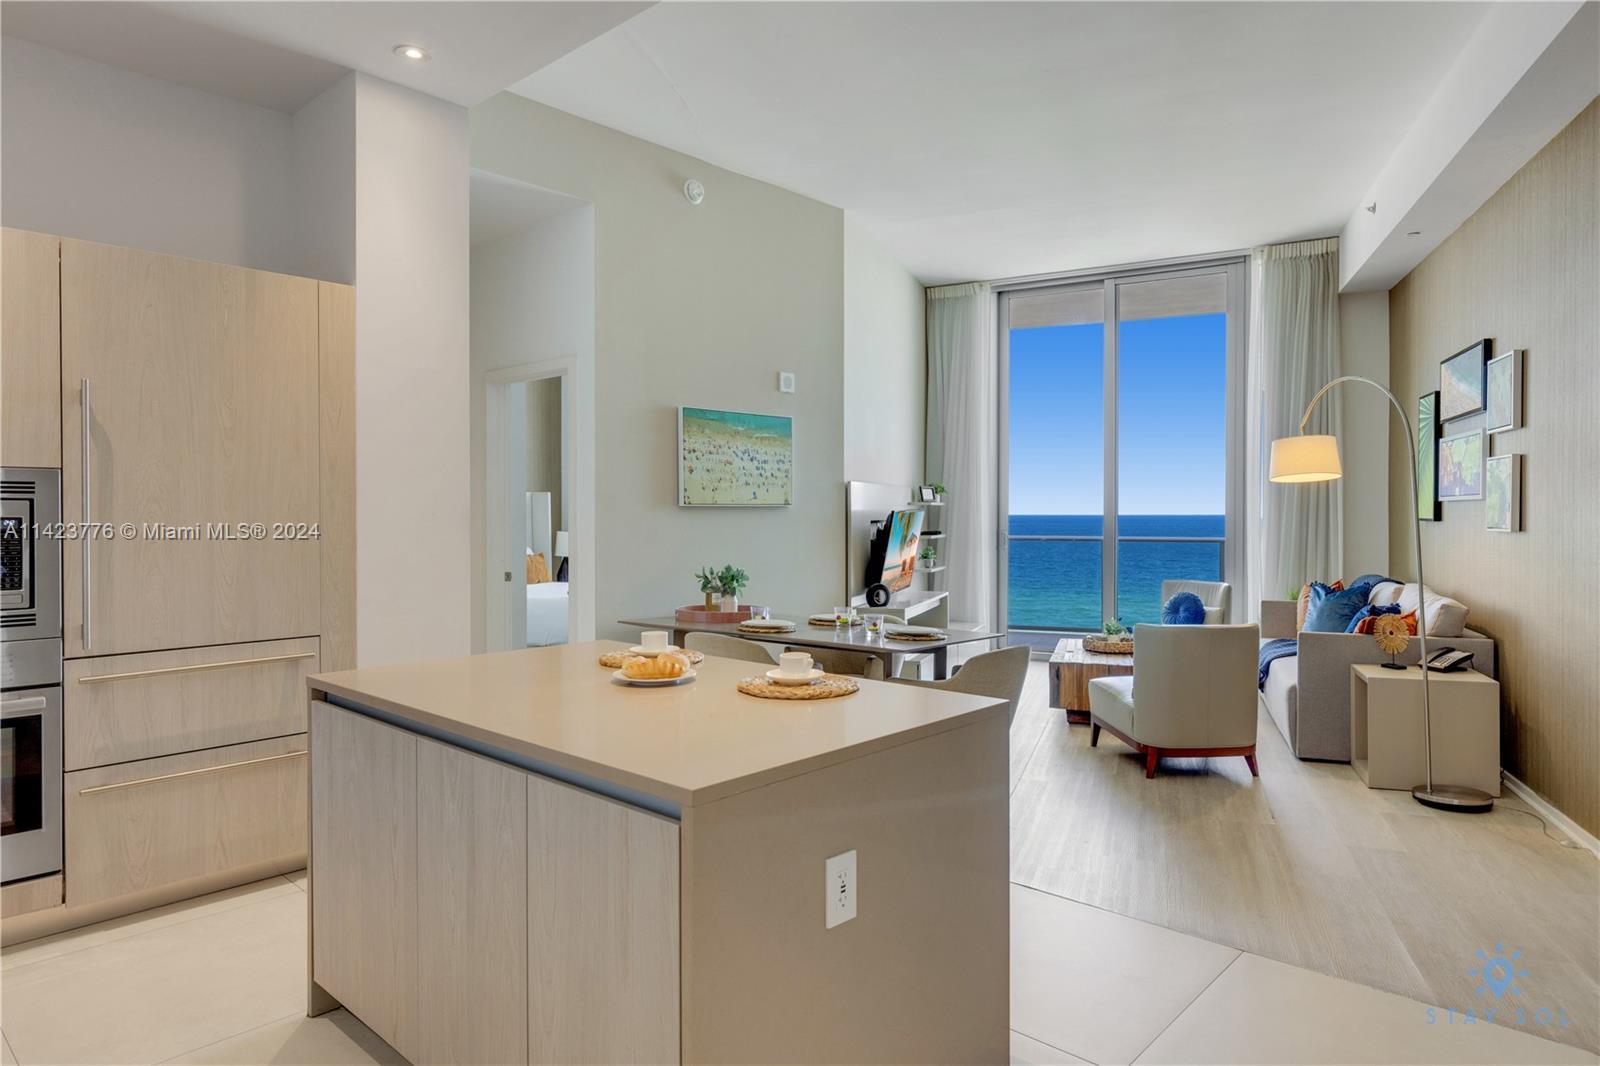 Photo of 4111 S Ocean Dr #602 in Hollywood, FL